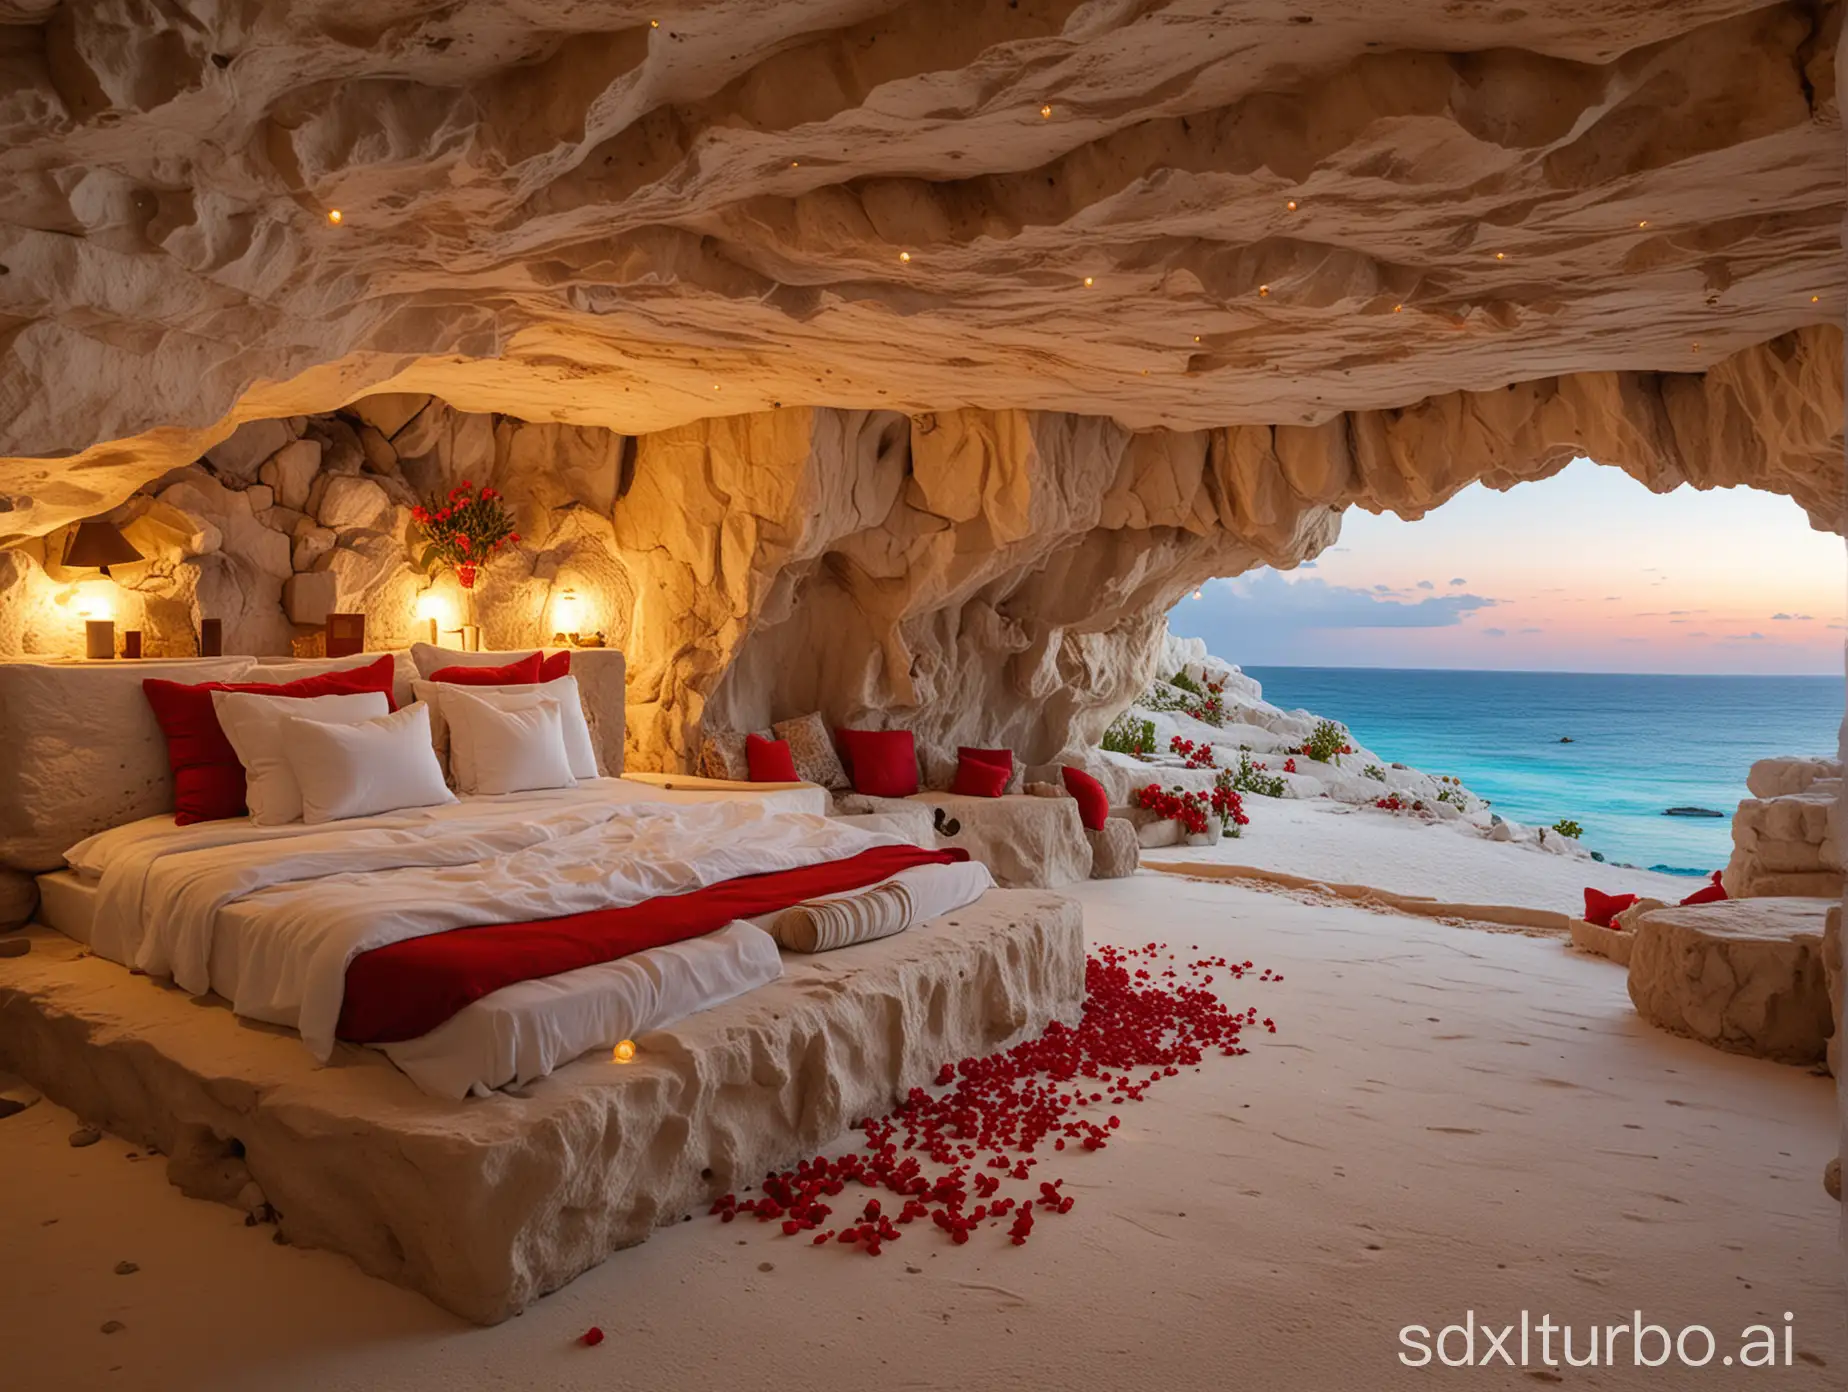 A comfortable bedroom with upholstery made of natural materials dug into the open cave of white rocks overlooking the sunny and warm water and white sands of a Caribbean Sea's shore on a nice afternoon sunset, with small blue flowers, and lots of red LED lights. The atmosphere is cosy, calm, and relaxing. There are lots of decoration around the seating area.